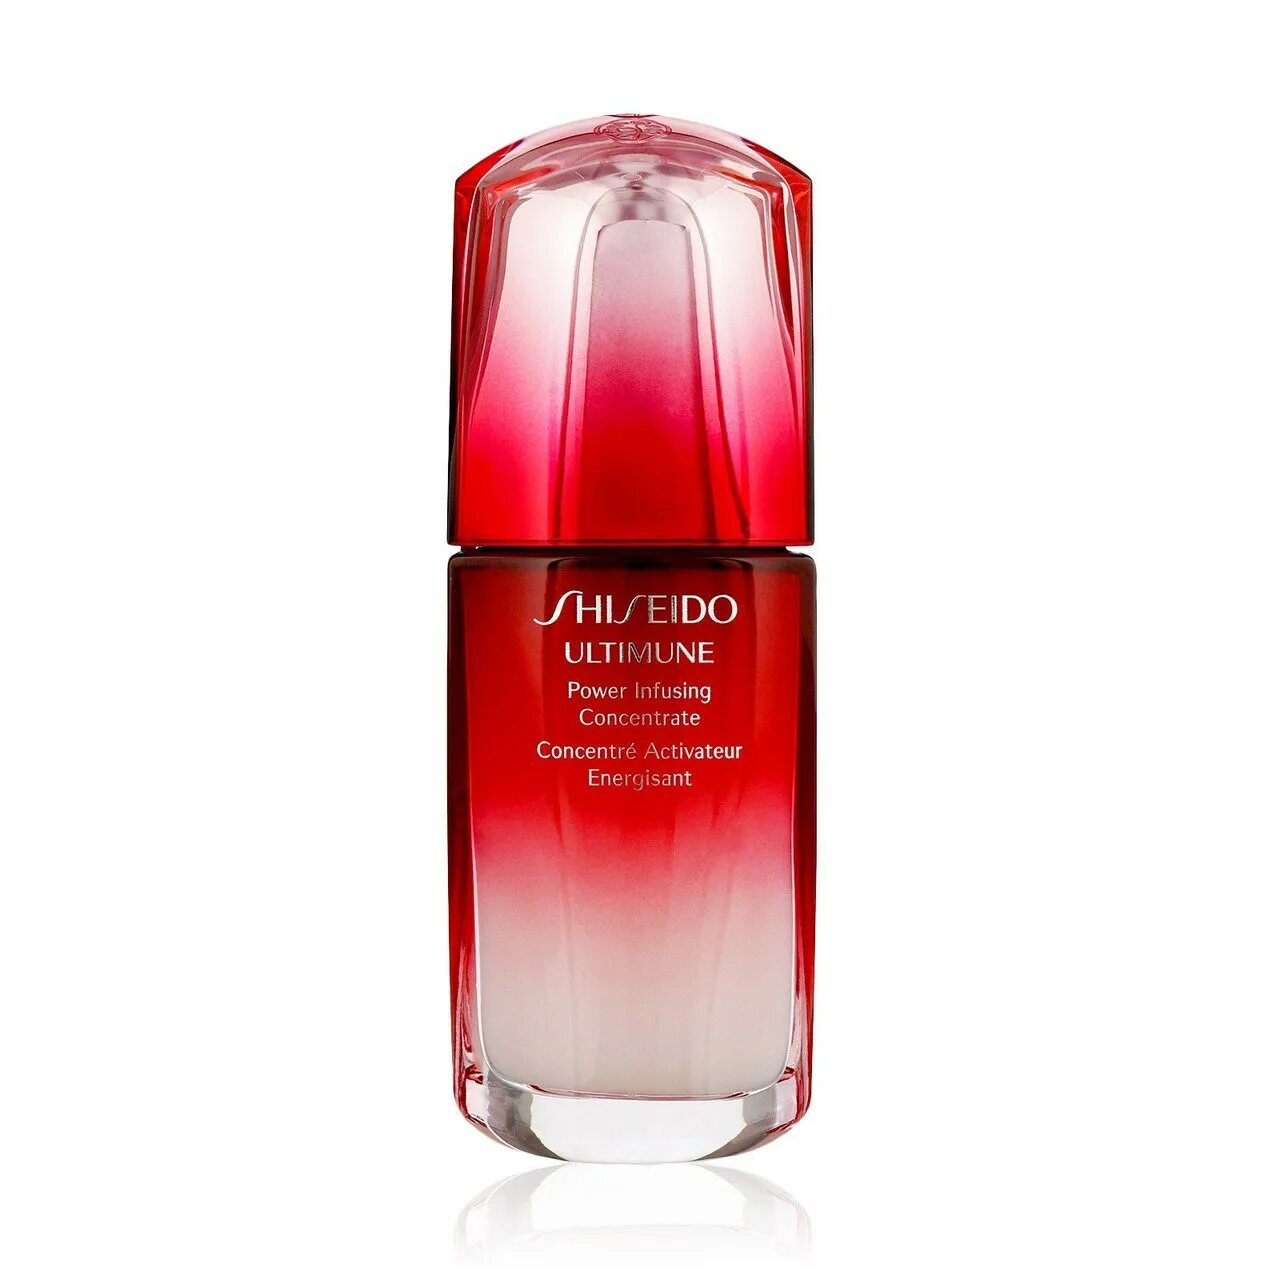 Shiseido power infusing concentrate. Shiseido Ultimune Power infusing Concentrate. Ultimune концентрат шисейдо. Ultimune концентрат шисейдо Power infusing. Концентрат Shiseido Ultimune Power infusing Concentrate.